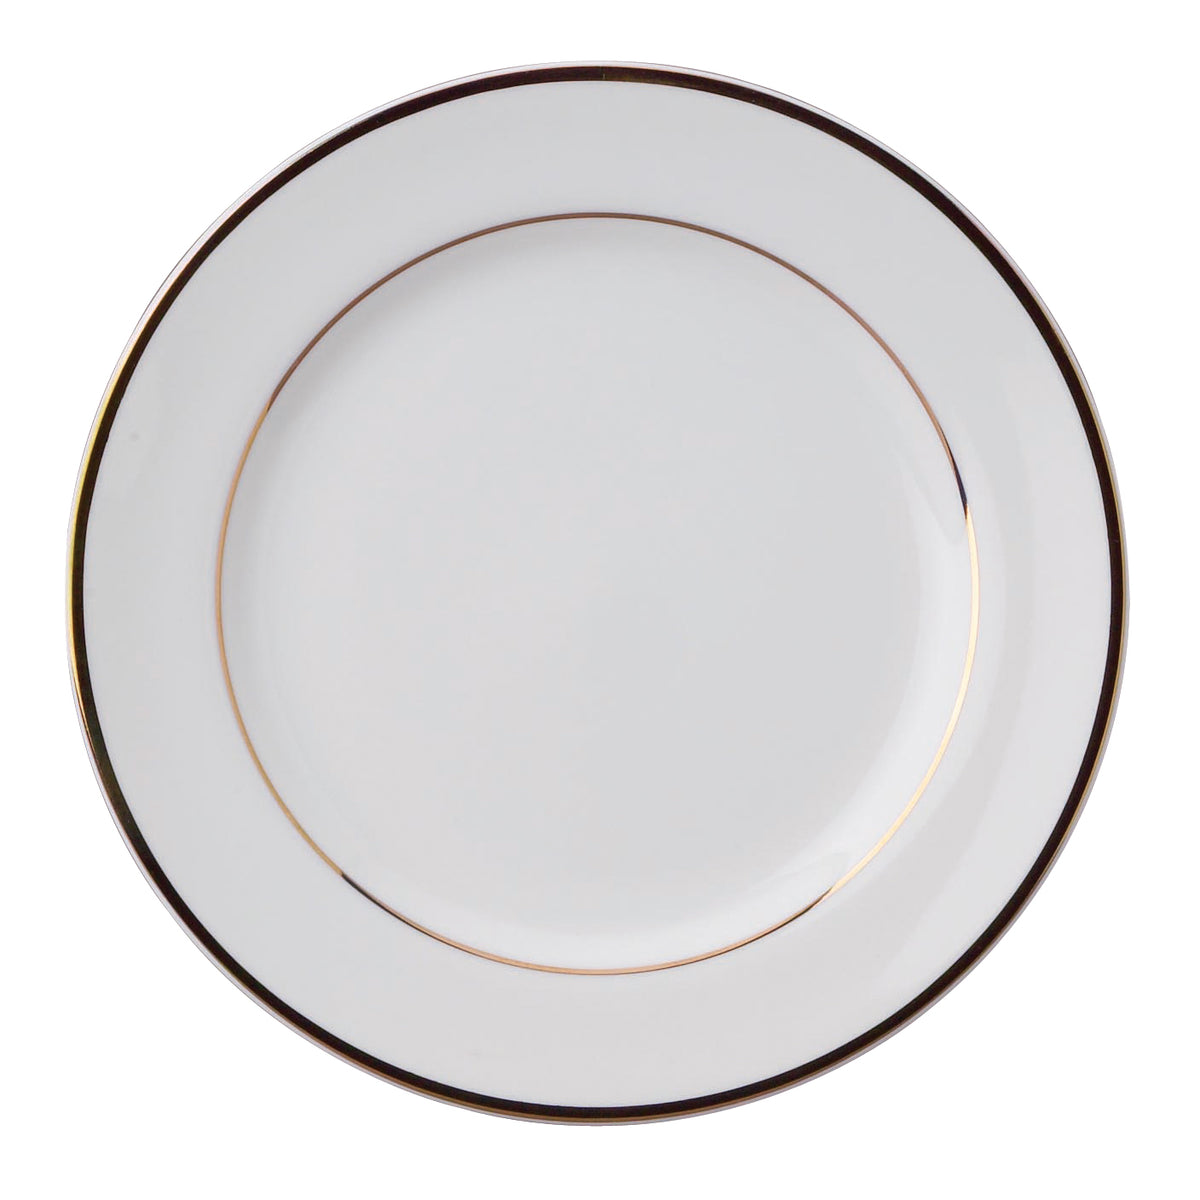 buy tabletop plates at cheap rate in bulk. wholesale & retail kitchen accessories & materials store.